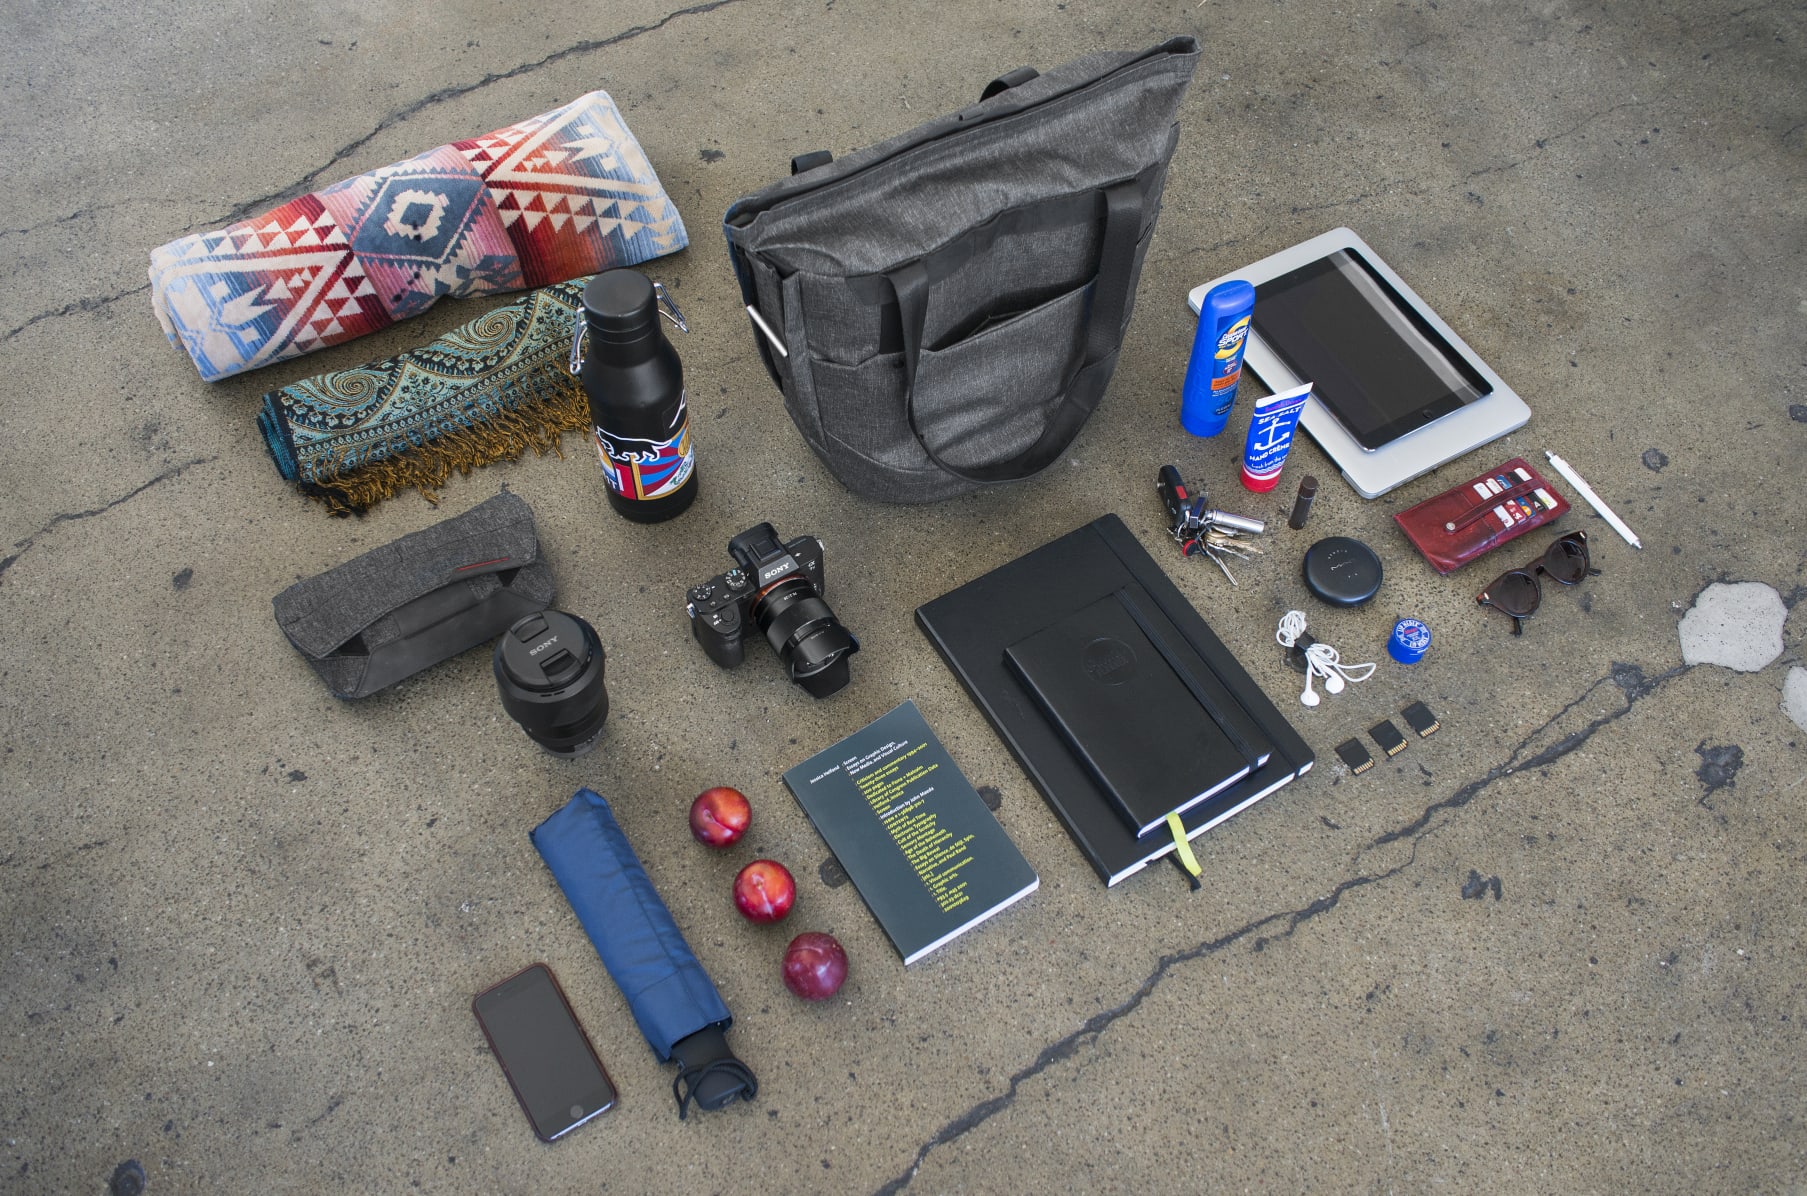 The Everything Bags - Cameras, Tech, & Travel by Moment — Kickstarter